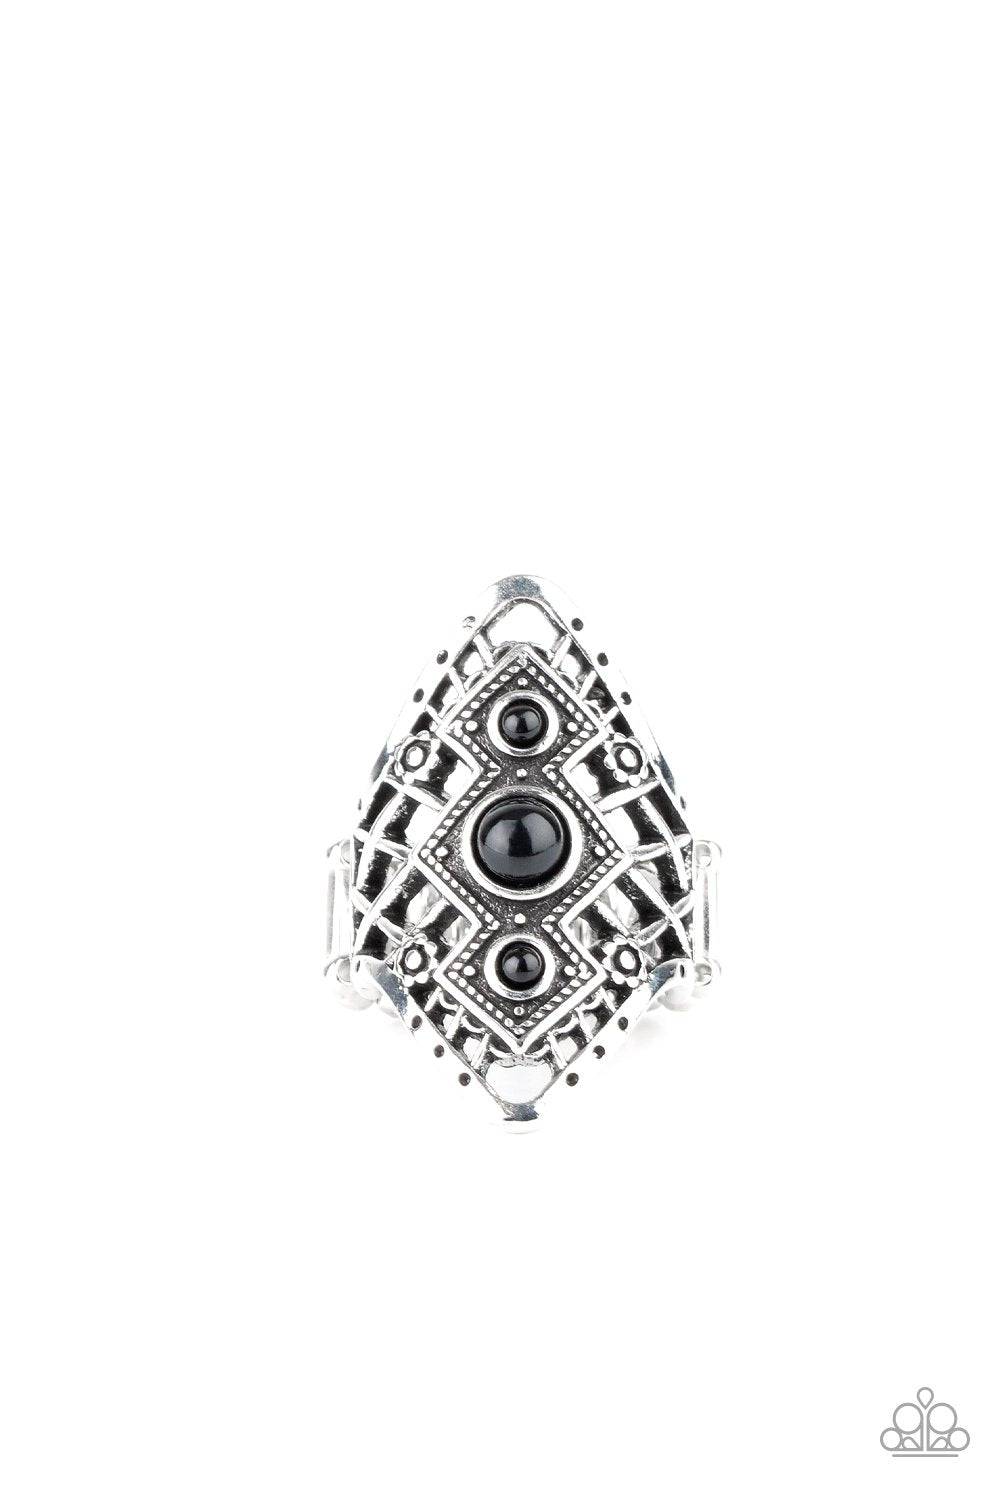 Desert Dreamland Black and Silver Ring - Paparazzi Accessories - lightbox -CarasShop.com - $5 Jewelry by Cara Jewels